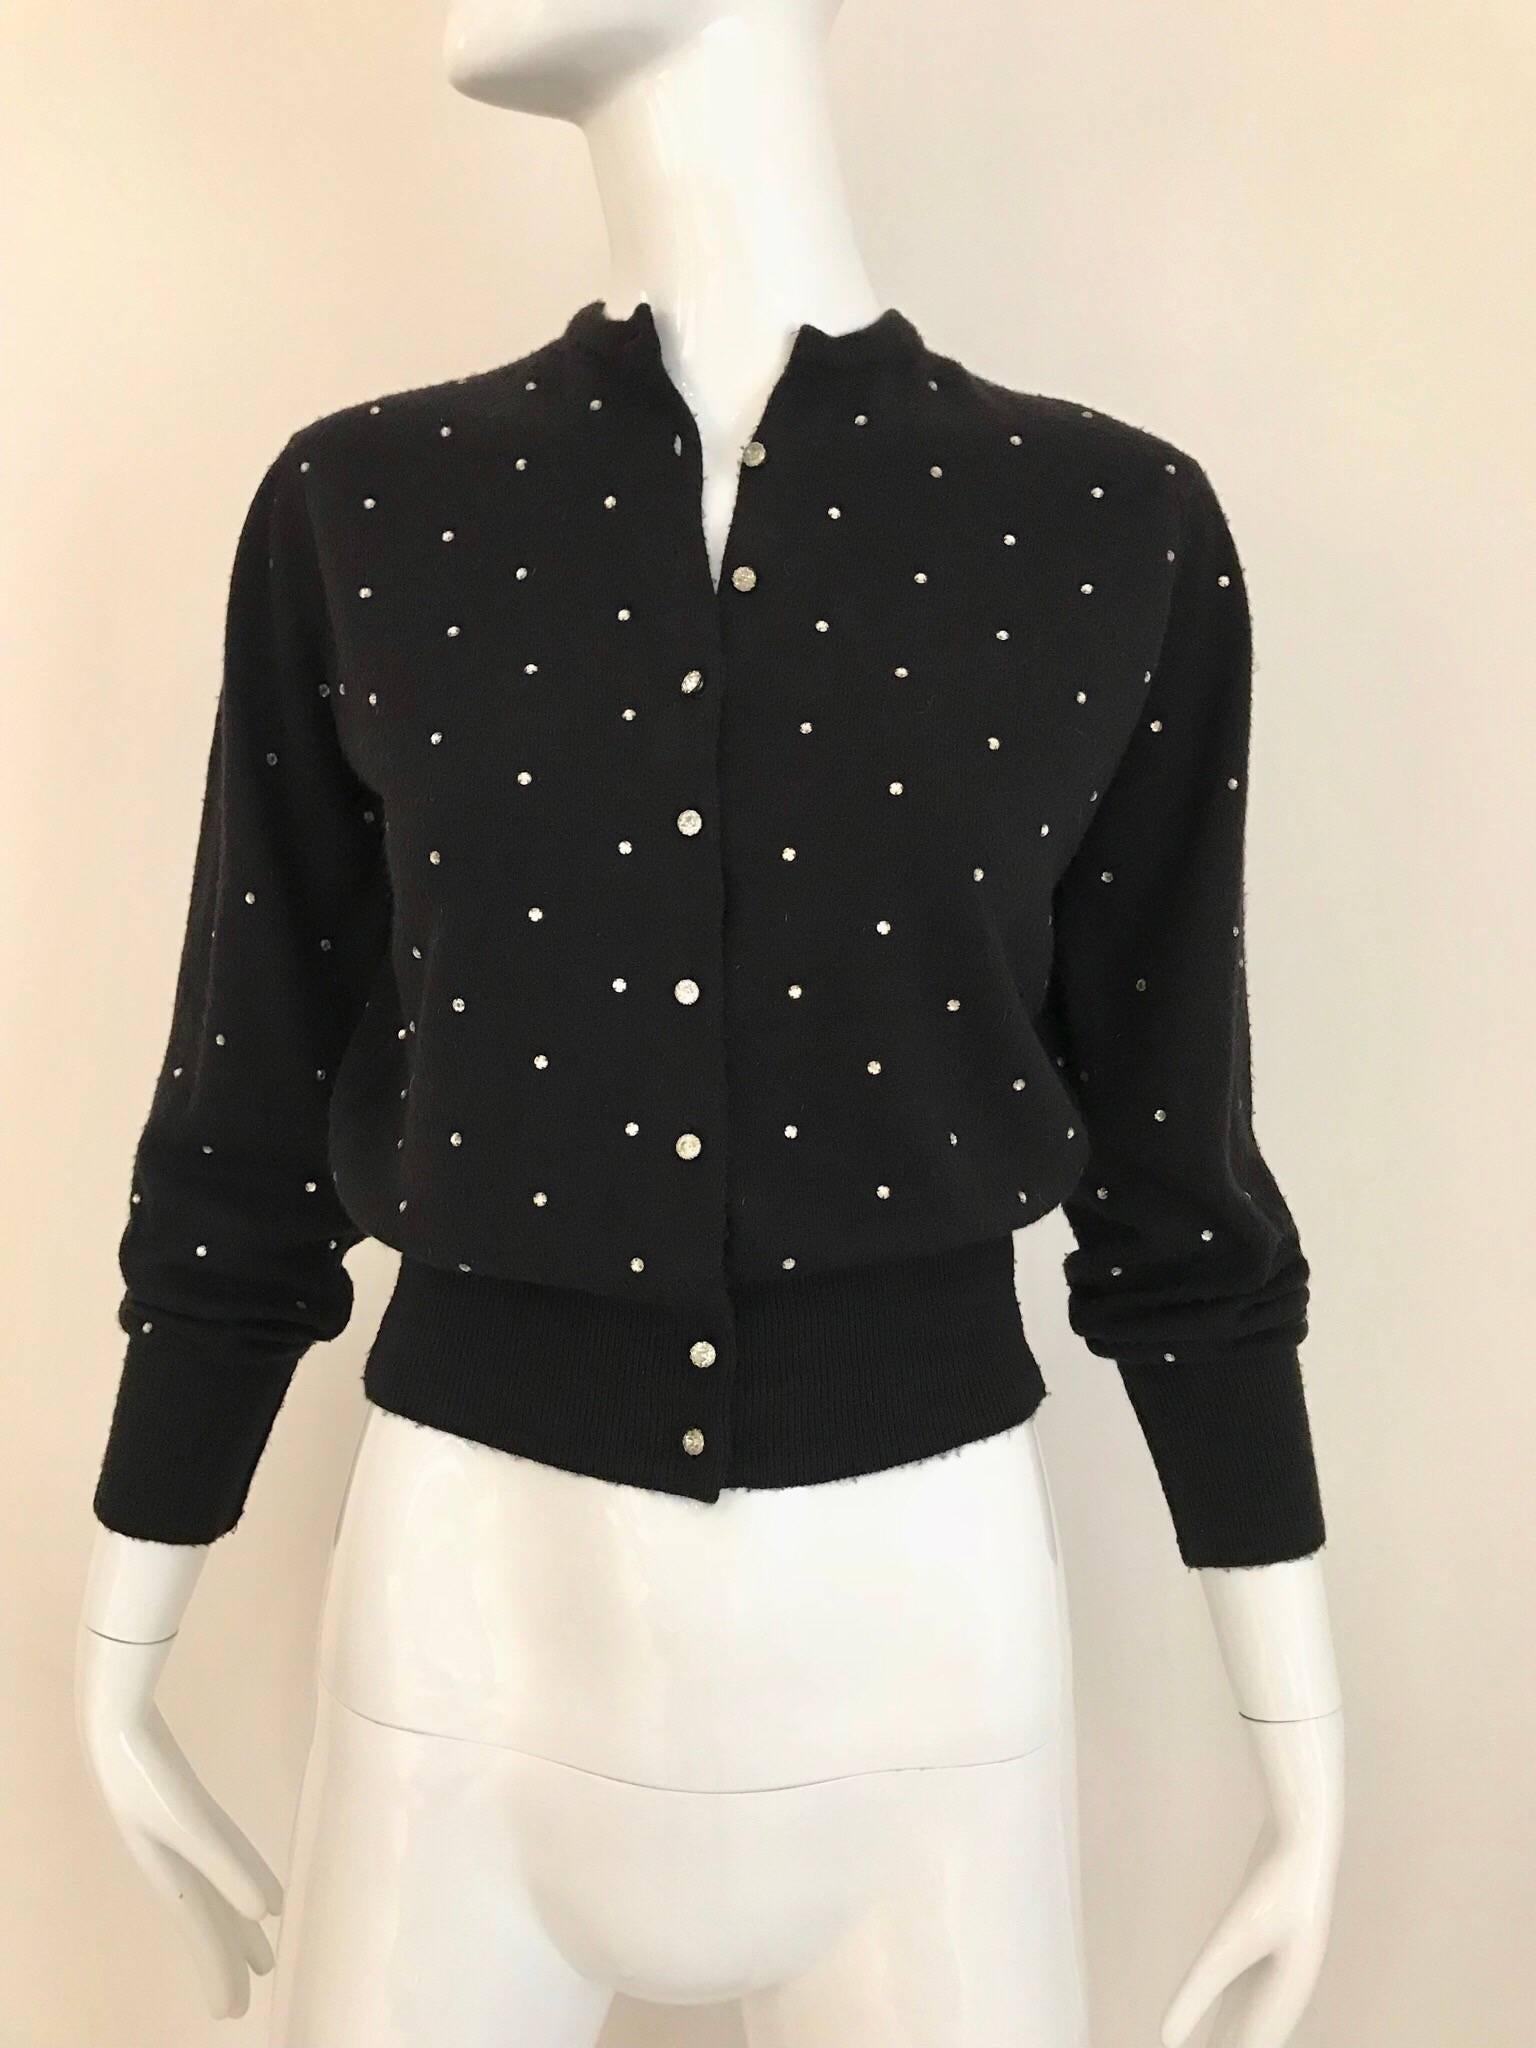 Elegant Vintage black sweater from 1950's by Schiaparelli in cashmere with a sparkle of rhinestones. The waist band further defines the feminine shape!
Size: Small (4 or 6) 
**missing 1 button on the fold 